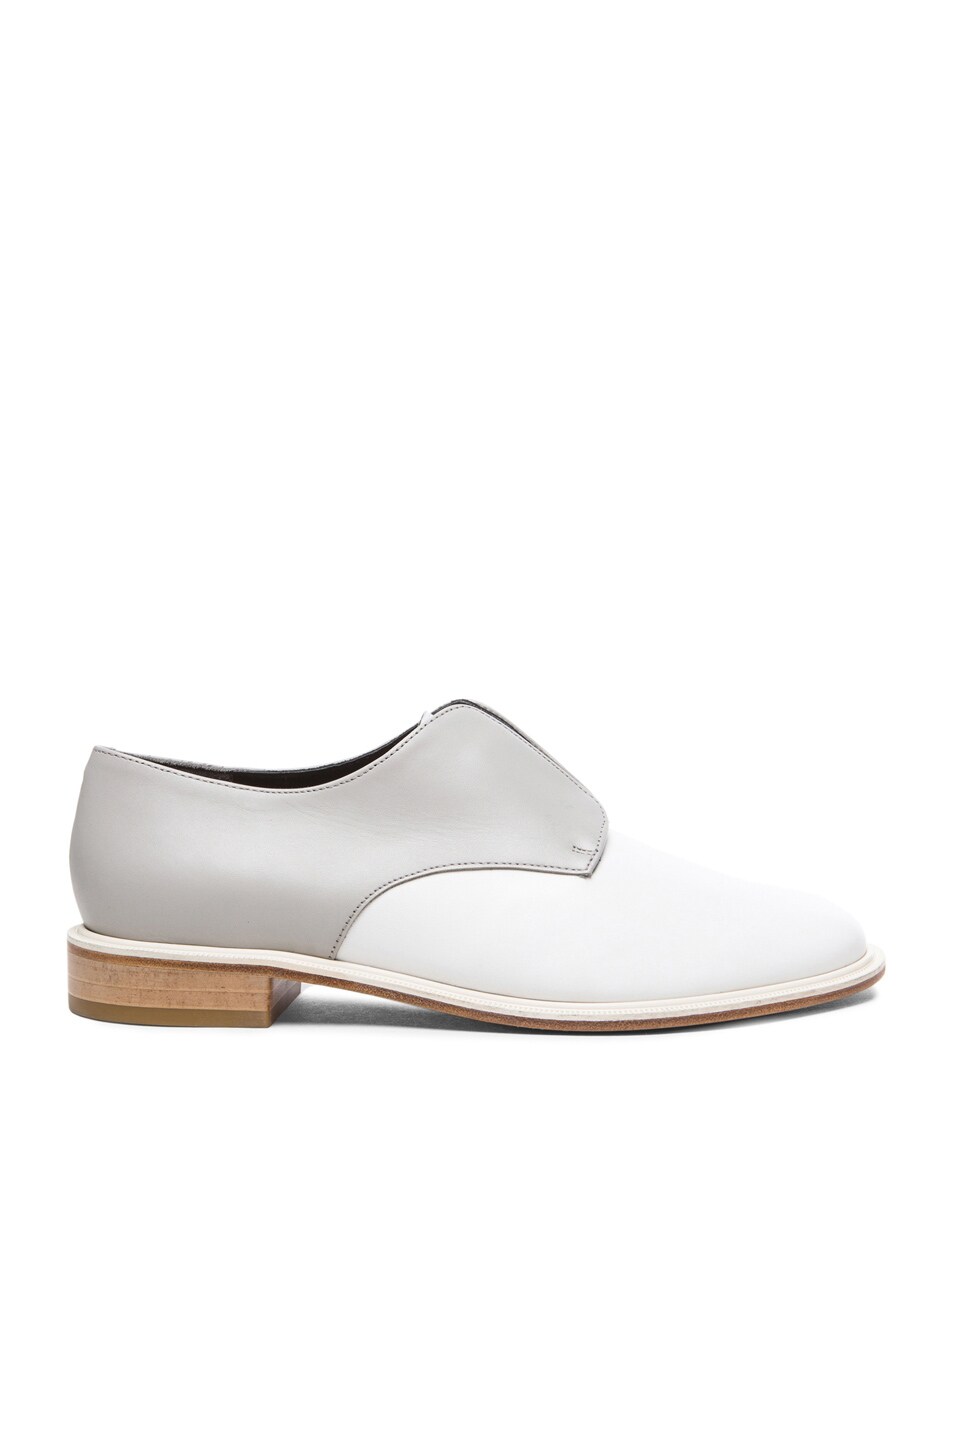 Image 1 of Robert Clergerie Jirac Leather Oxfords in White & Grey